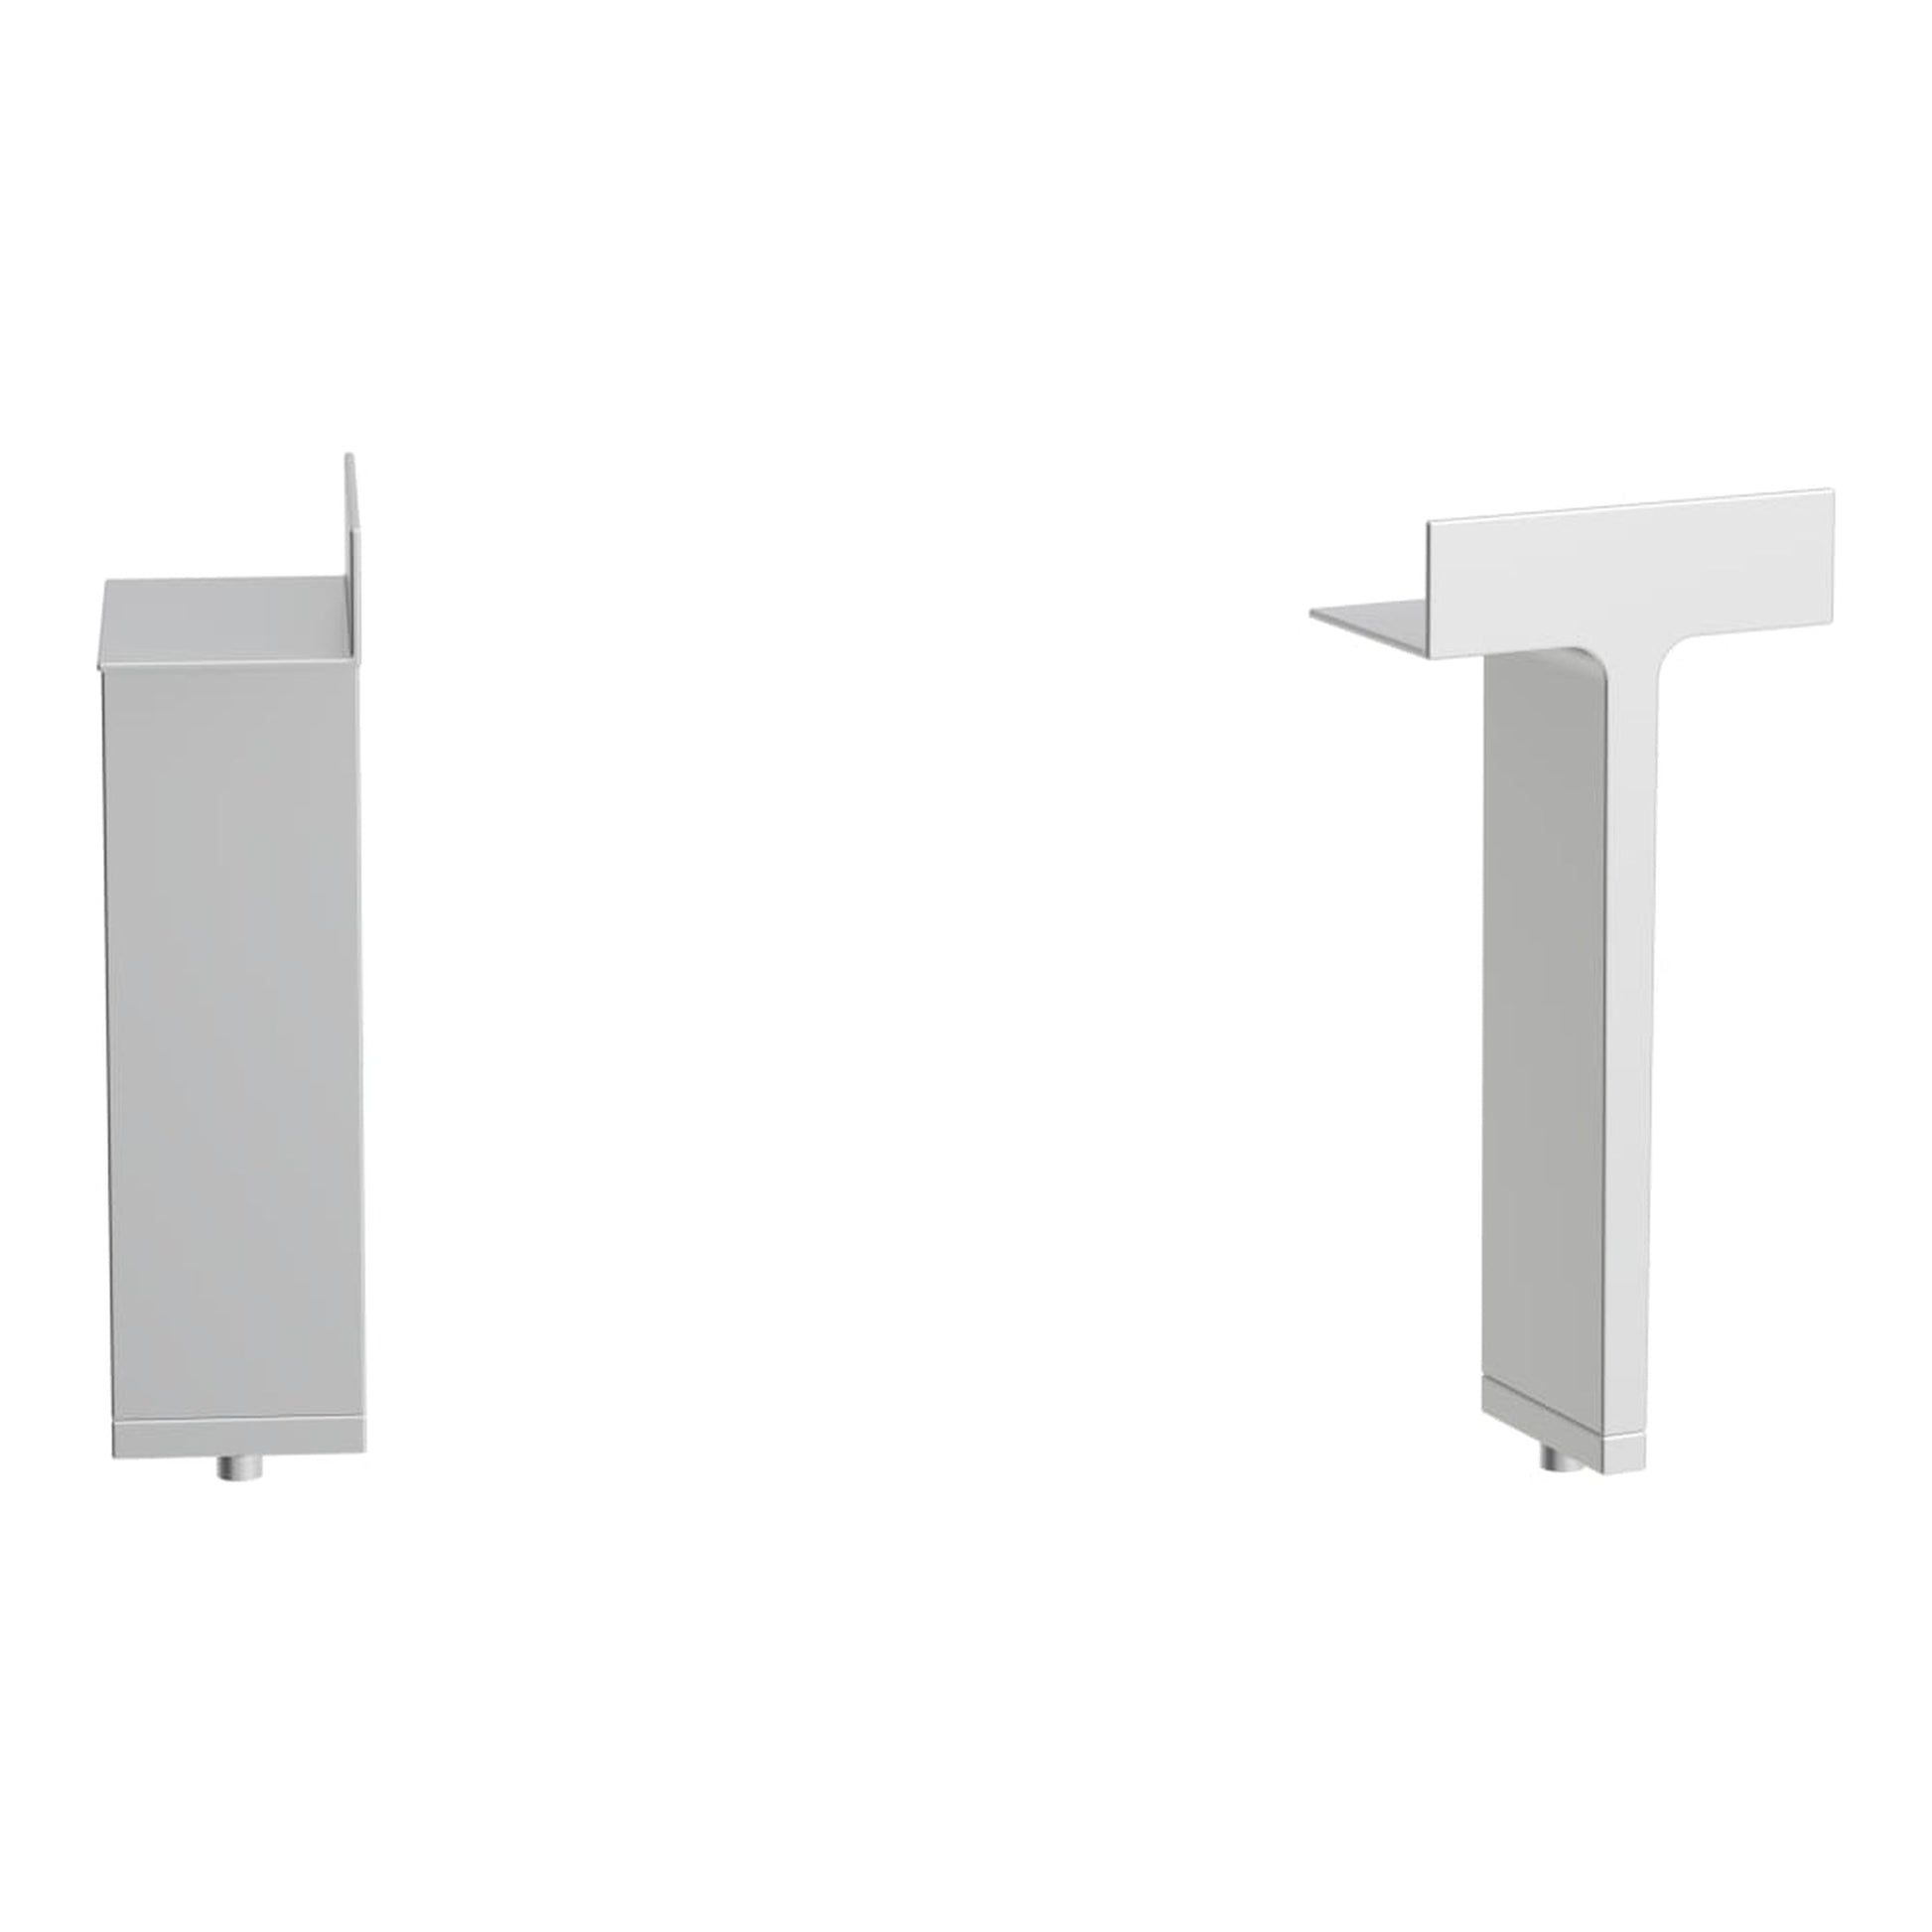 Laufen Kartell 2" x 7" 2-Piece White Adjustable Feet for Kartell Vanities and Cabinets